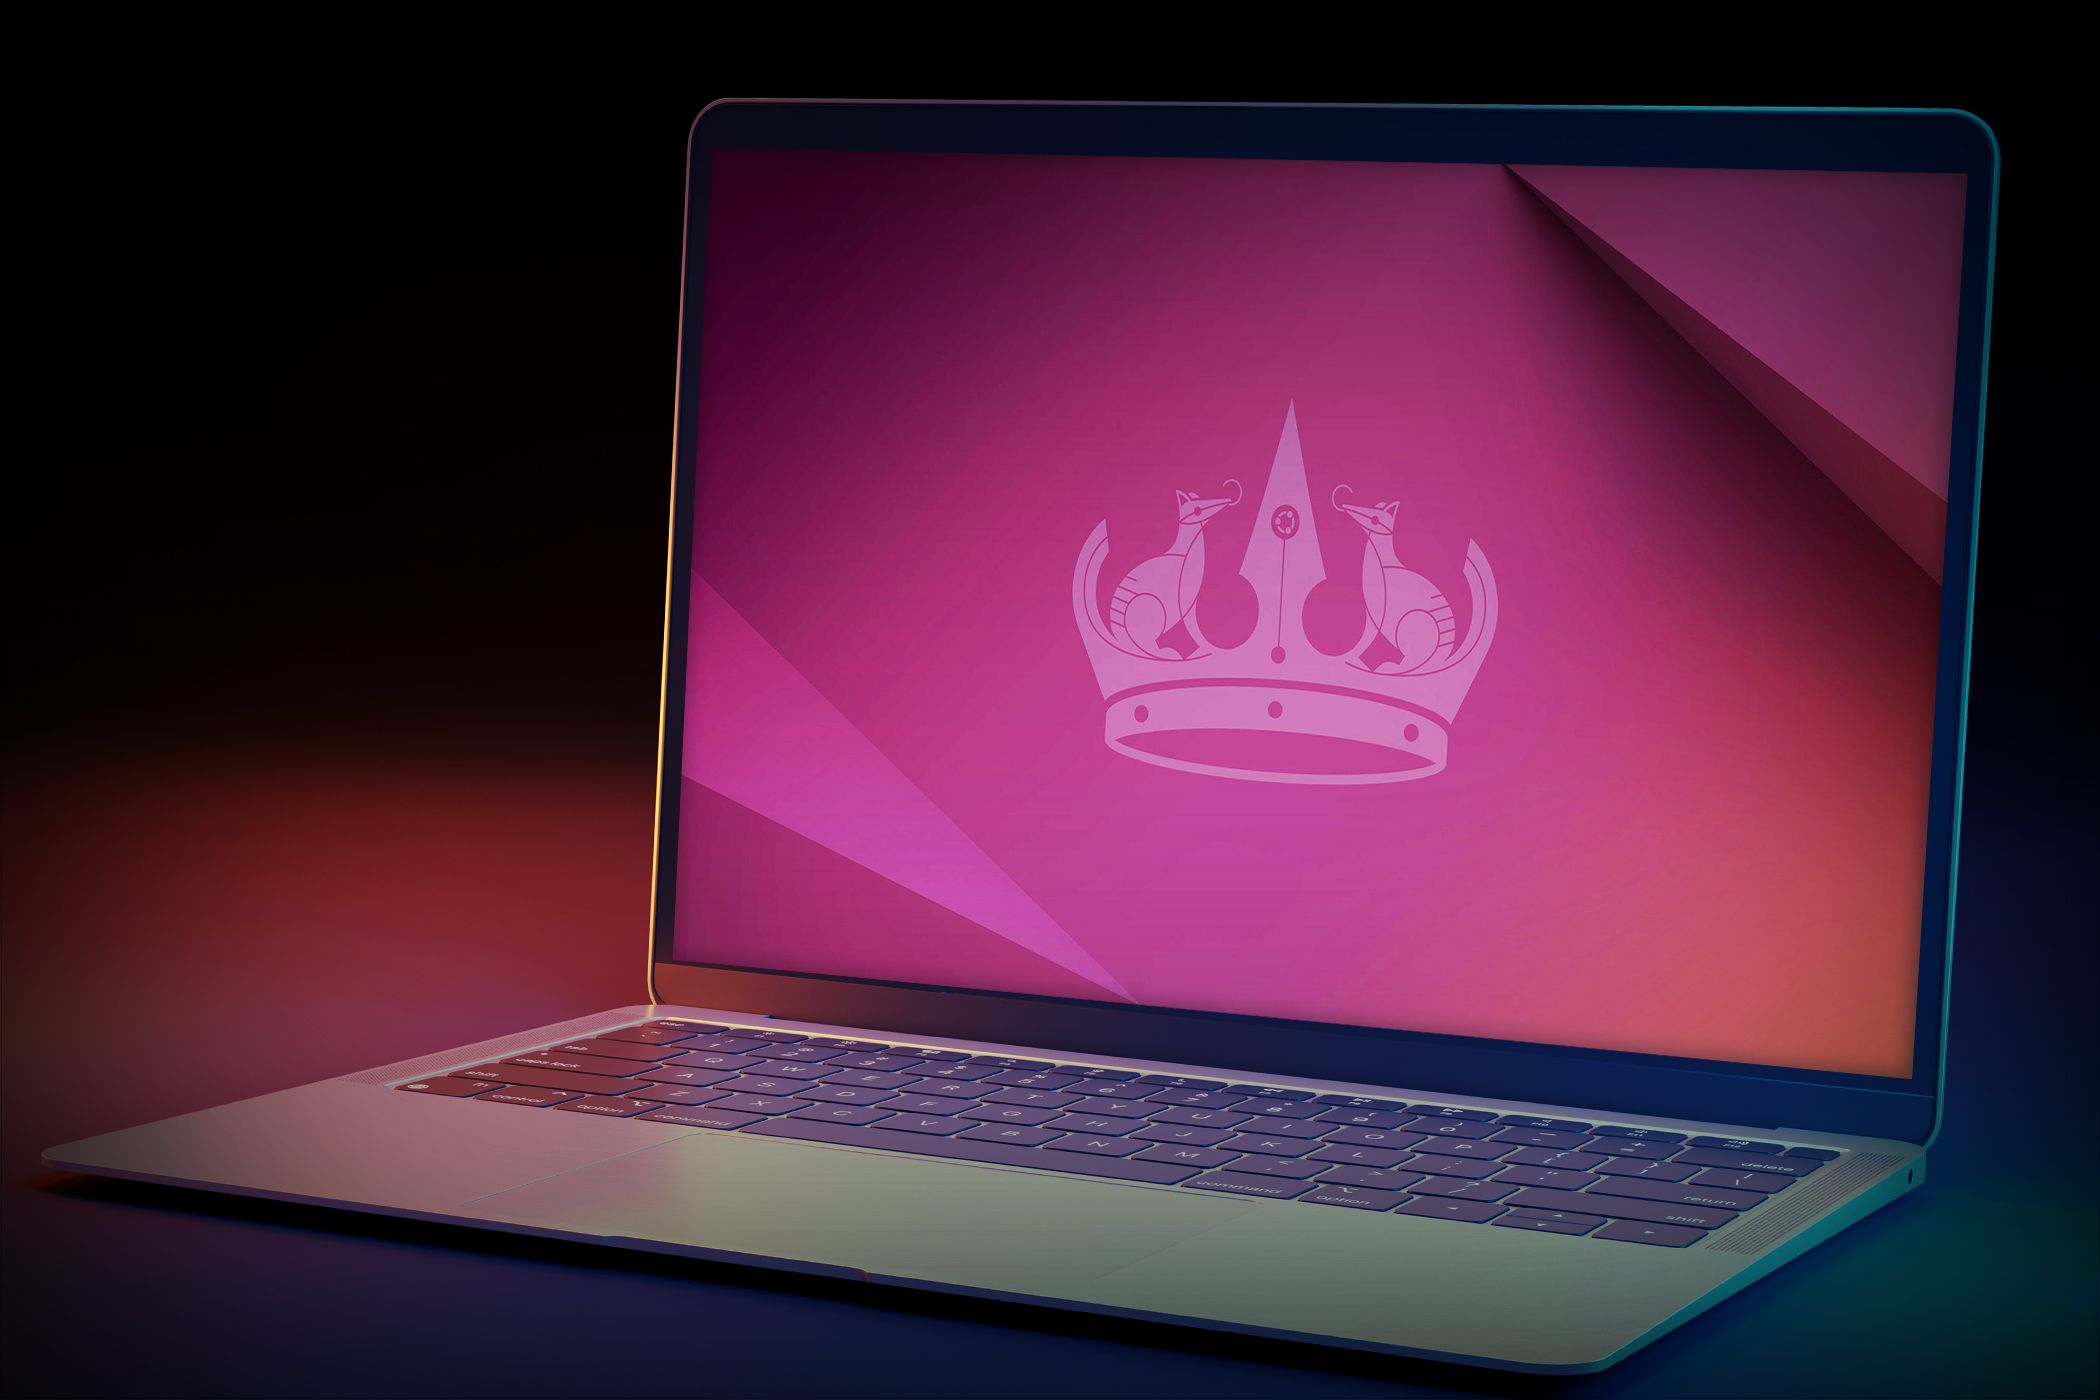 A sleek laptop with a vibrant, gradient screen showing a minimalist crown logo